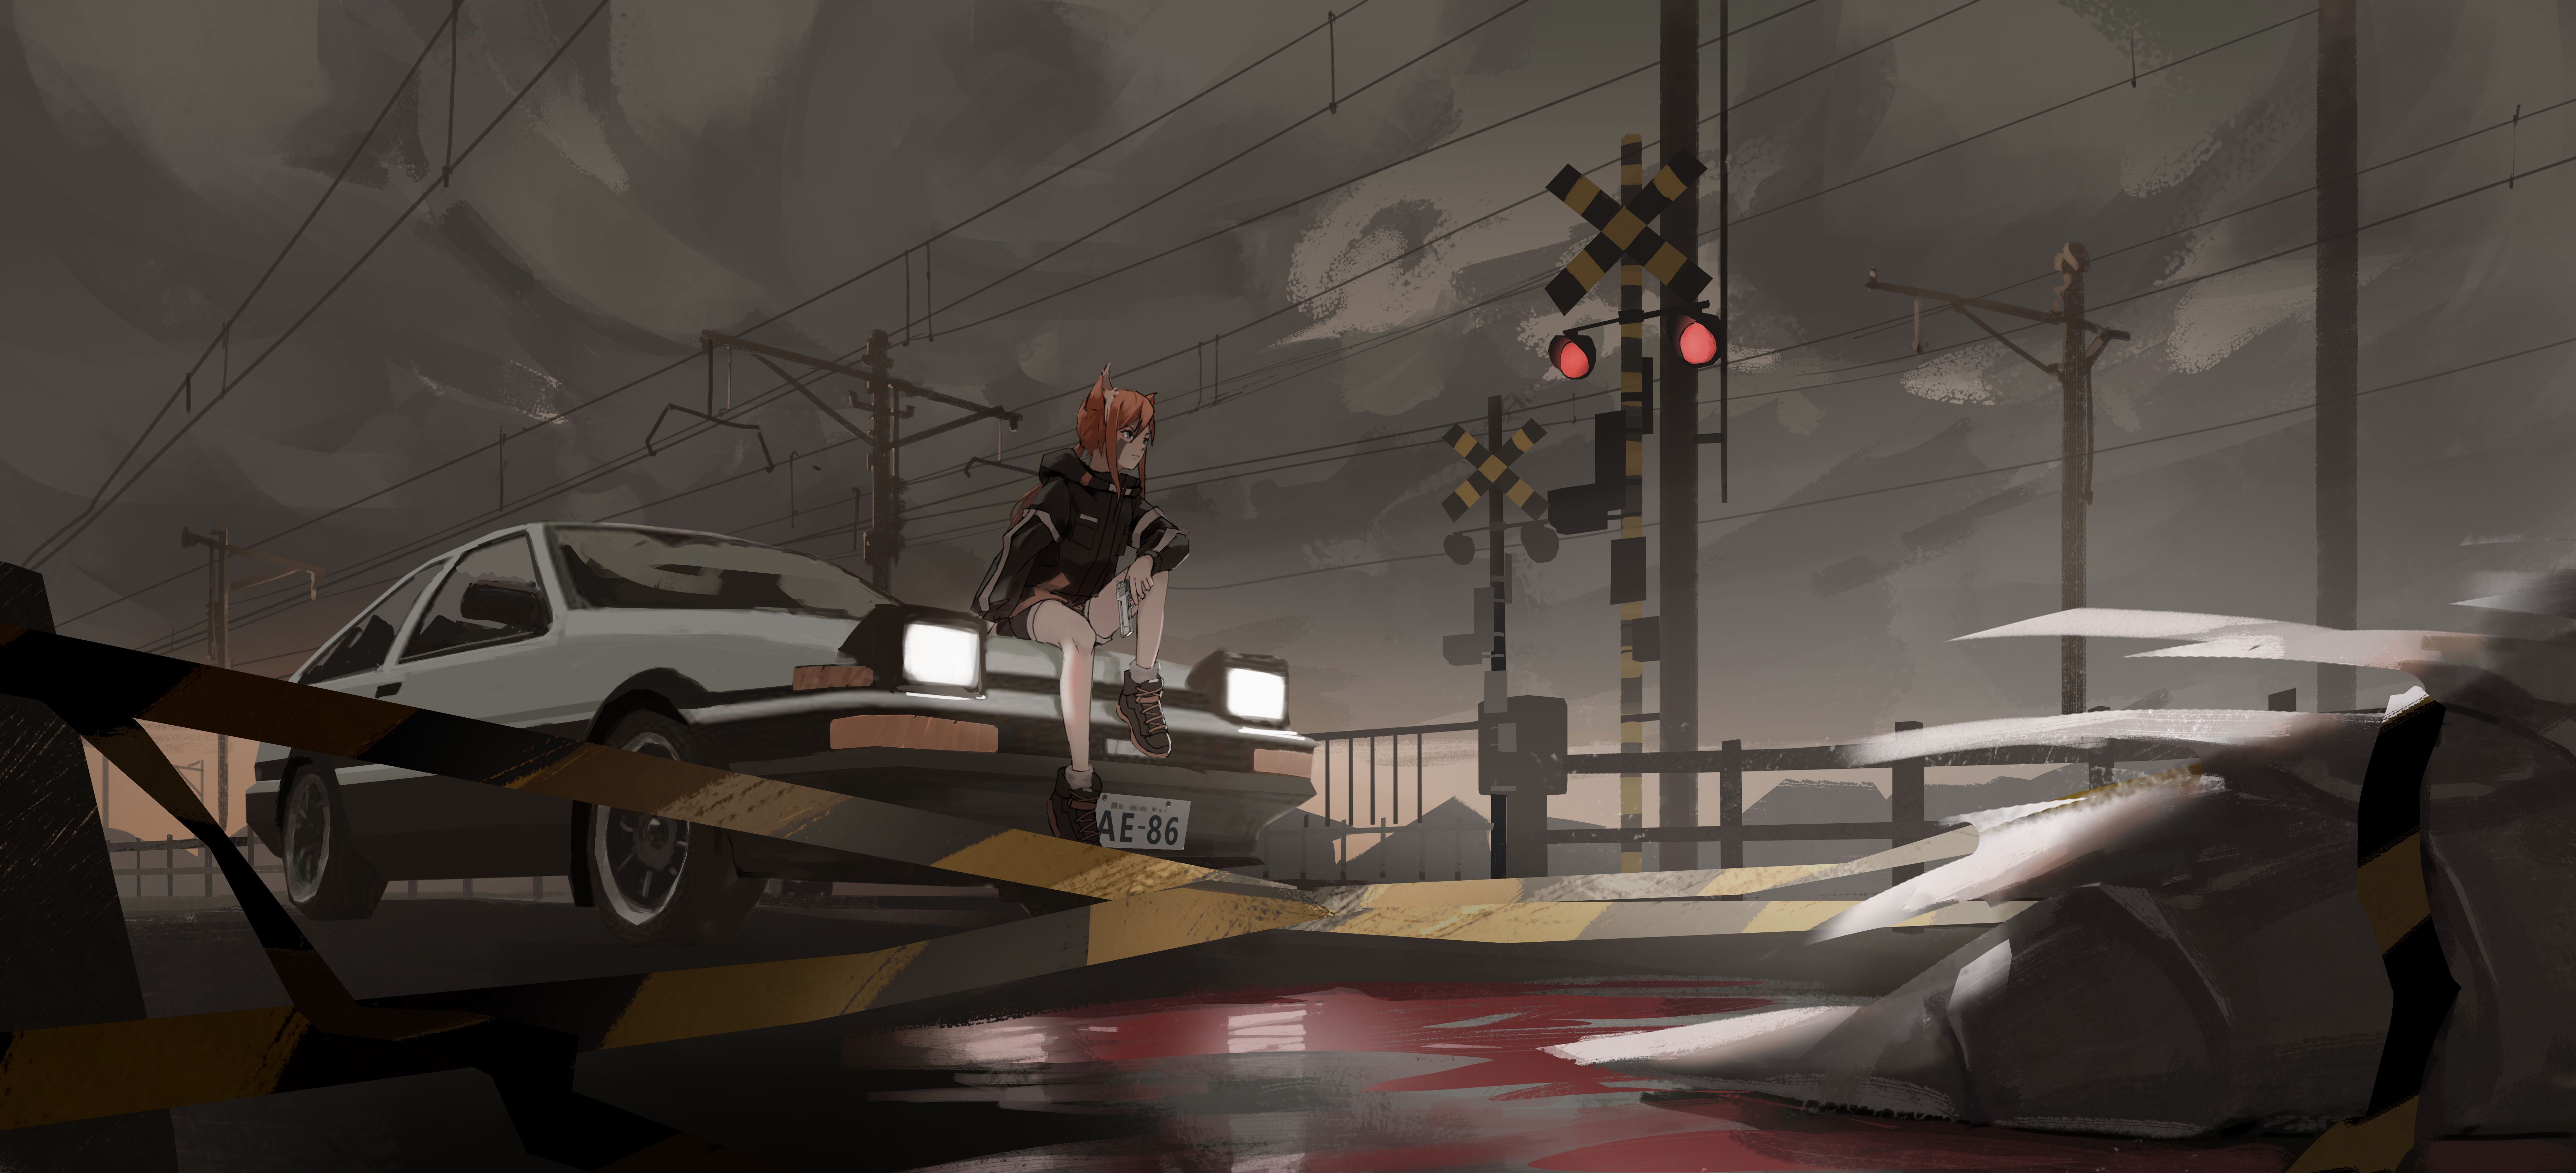 Wallpaper 4k Anime Girl On Train Track With Car